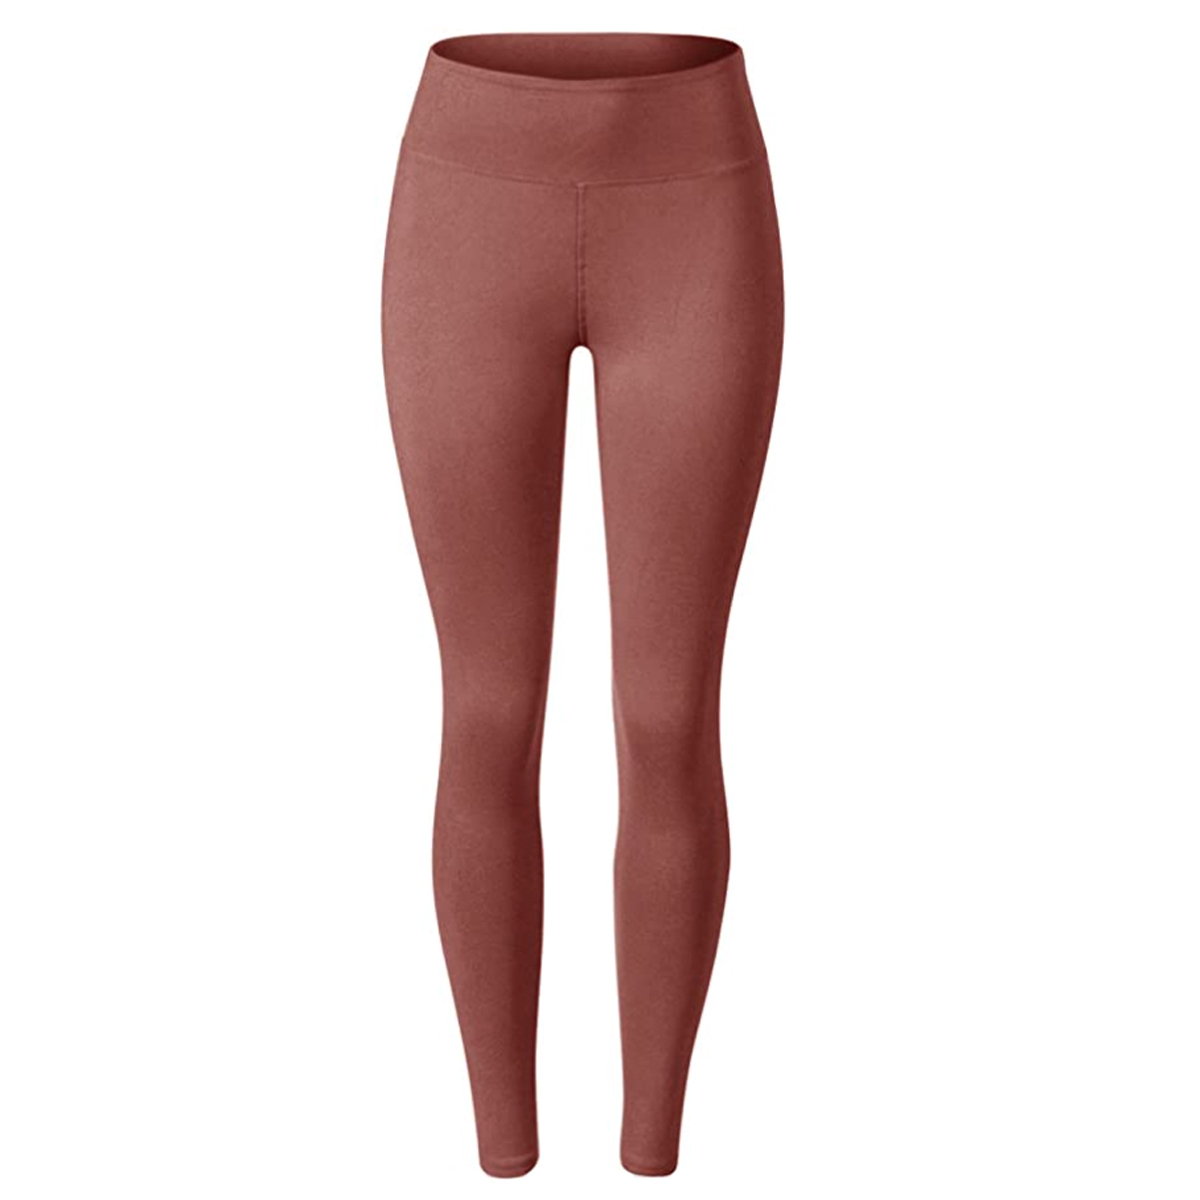 Bona Fide Leggings Review  International Society of Precision Agriculture